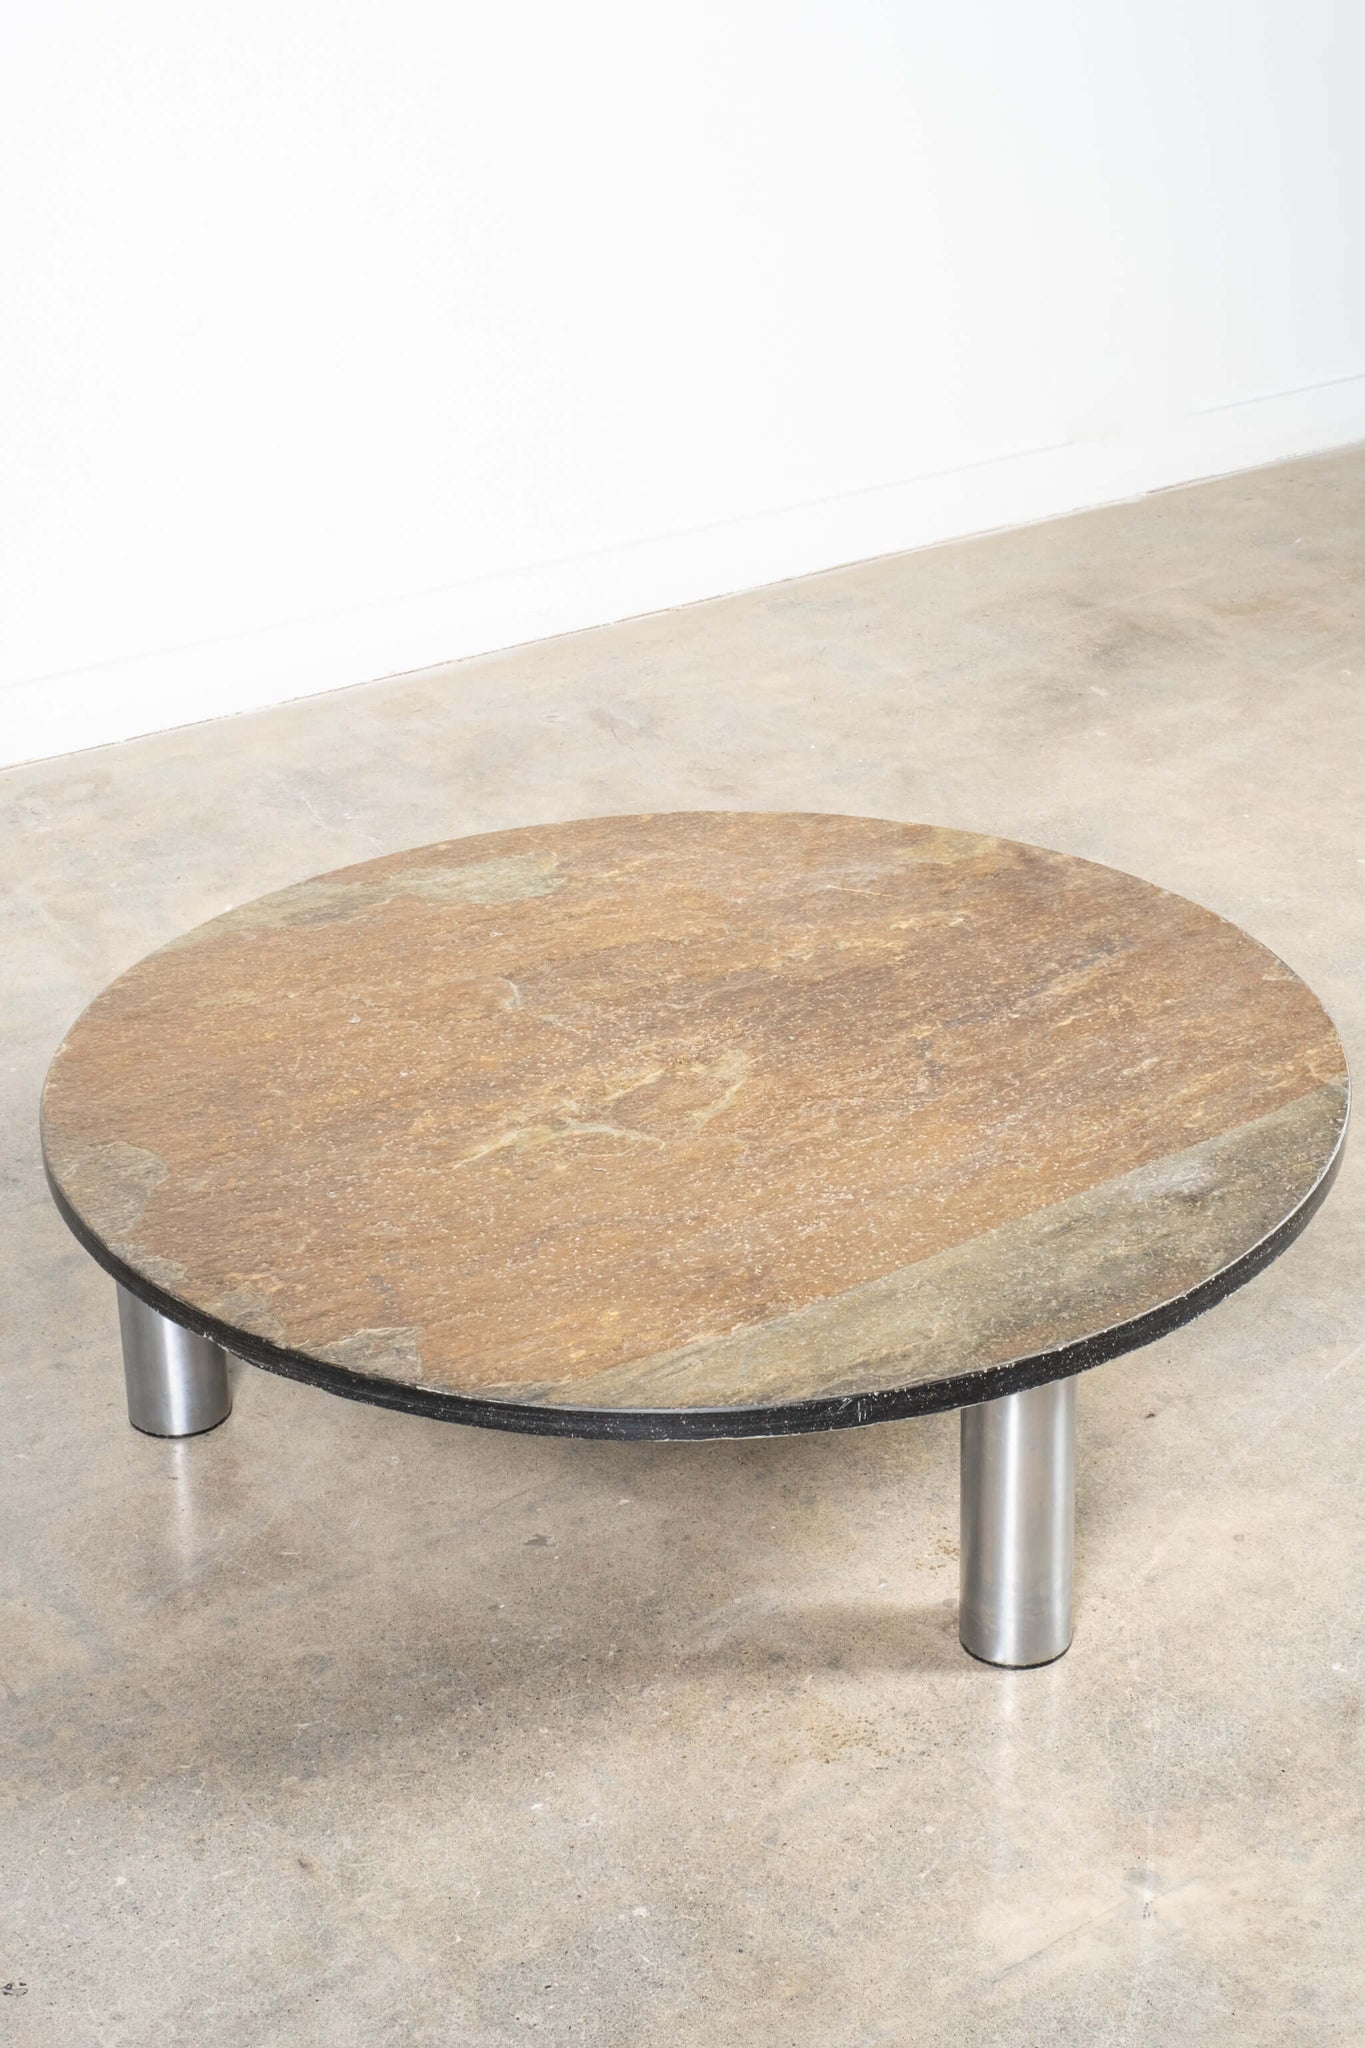 Vintage Round Coffee Table with Metal Frame and Slate Stone Top, top view